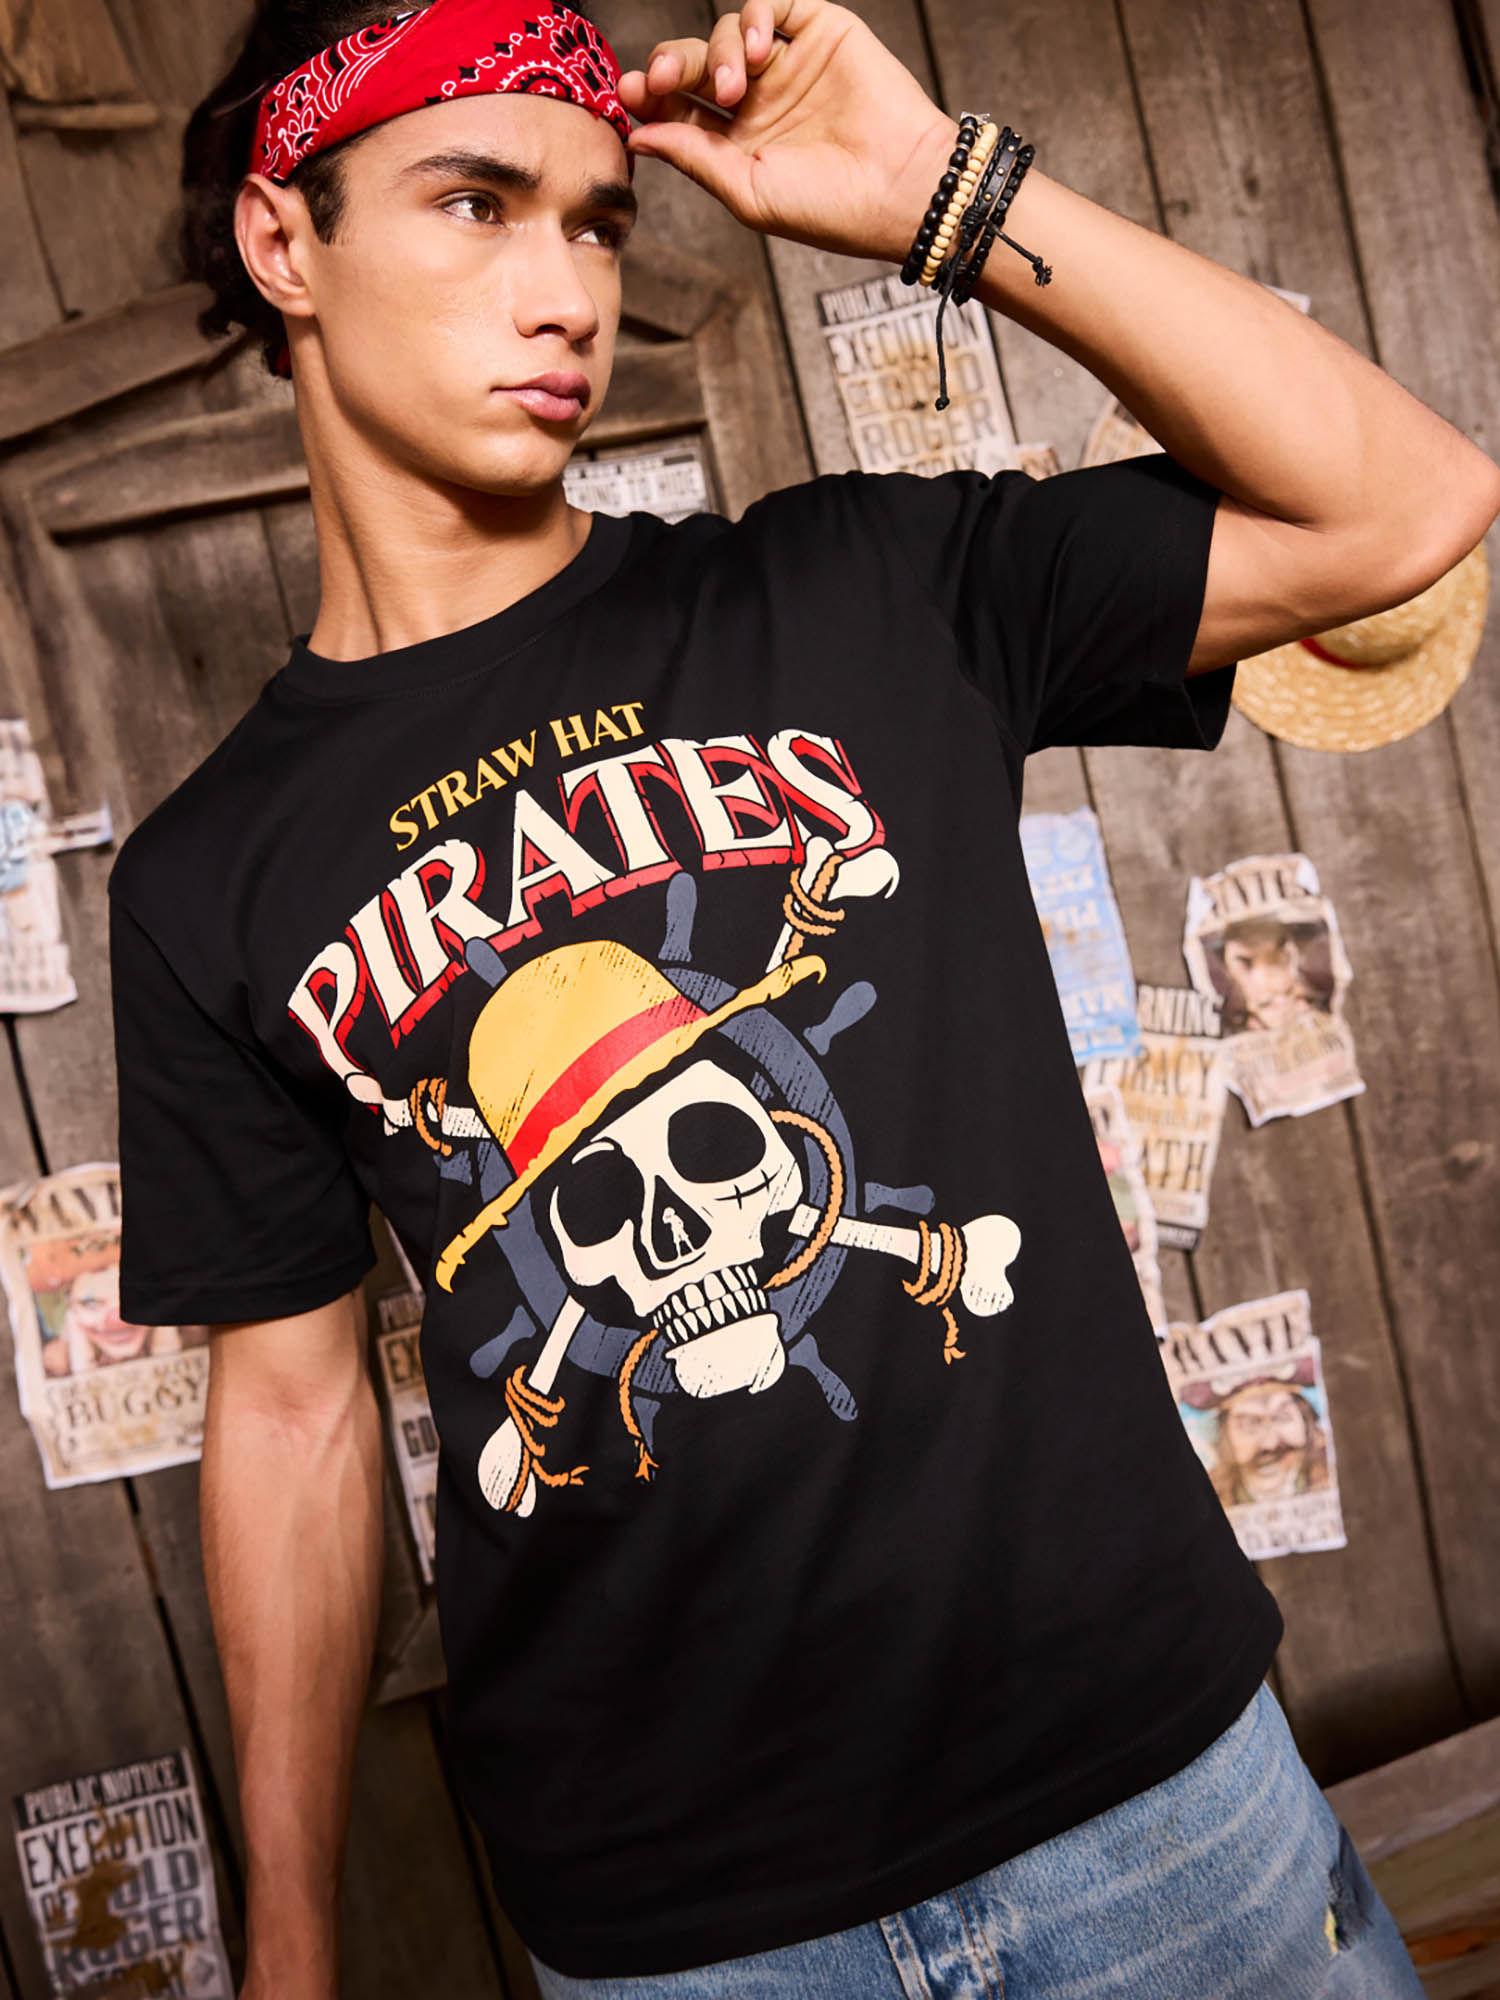 official one piece: straw hat pirates t-shirt